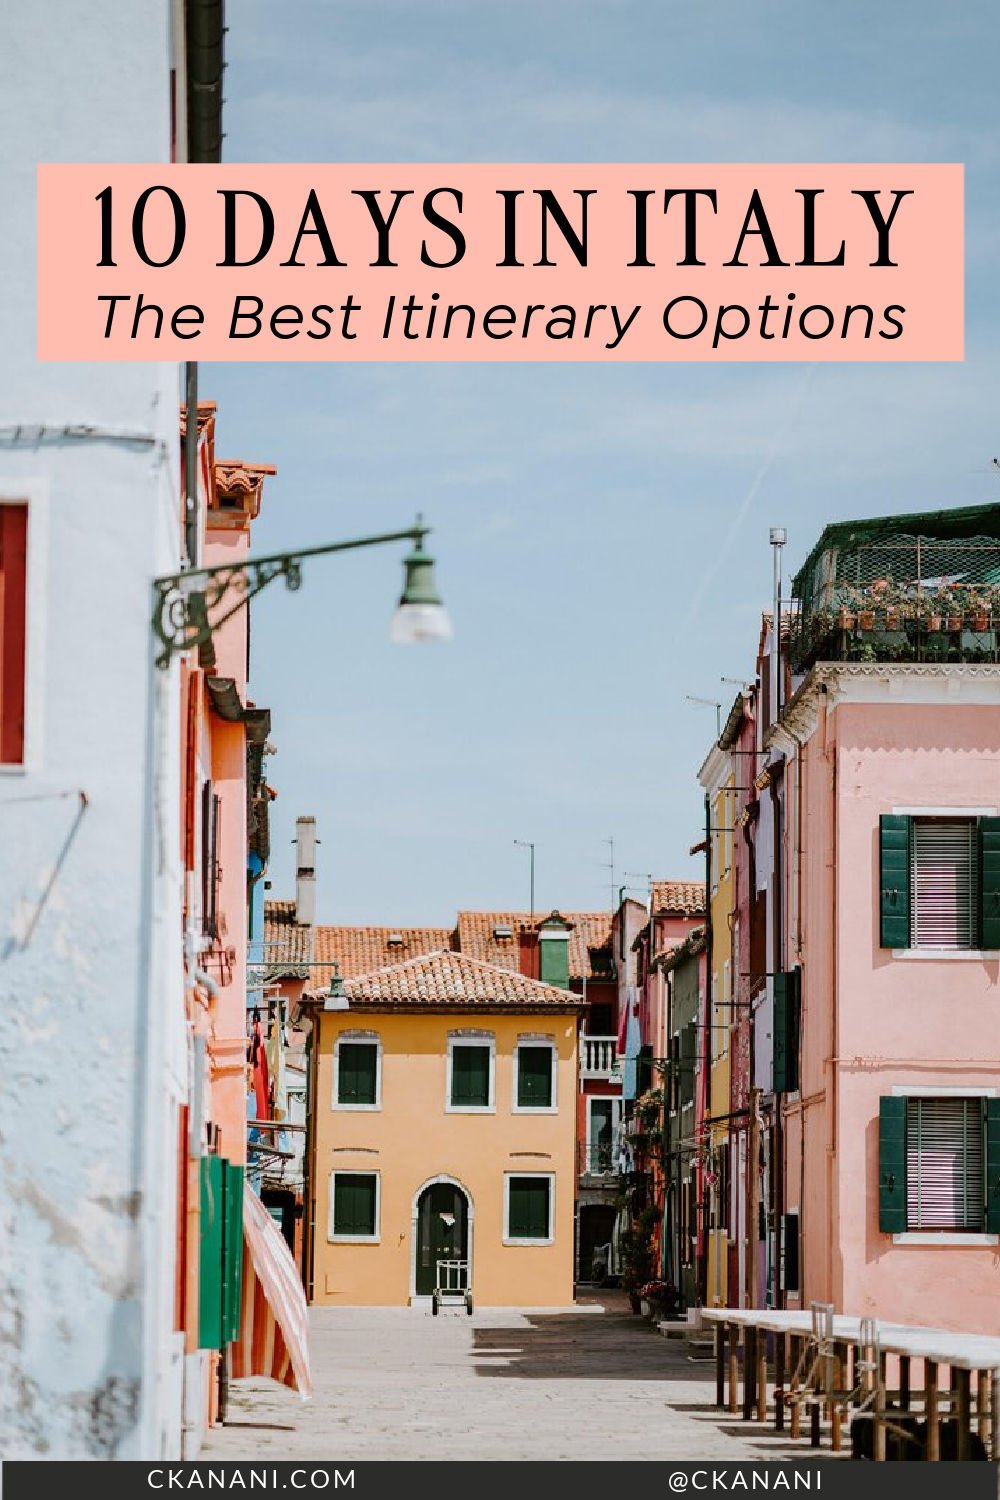 The best Italy itinerary! How to spend 10 days in Italy. Italy travel tips, Italy traveling, Italy vacation, Italy travel guide, Italy trip, Italy vacations, Italy travel destinations, Italy trips